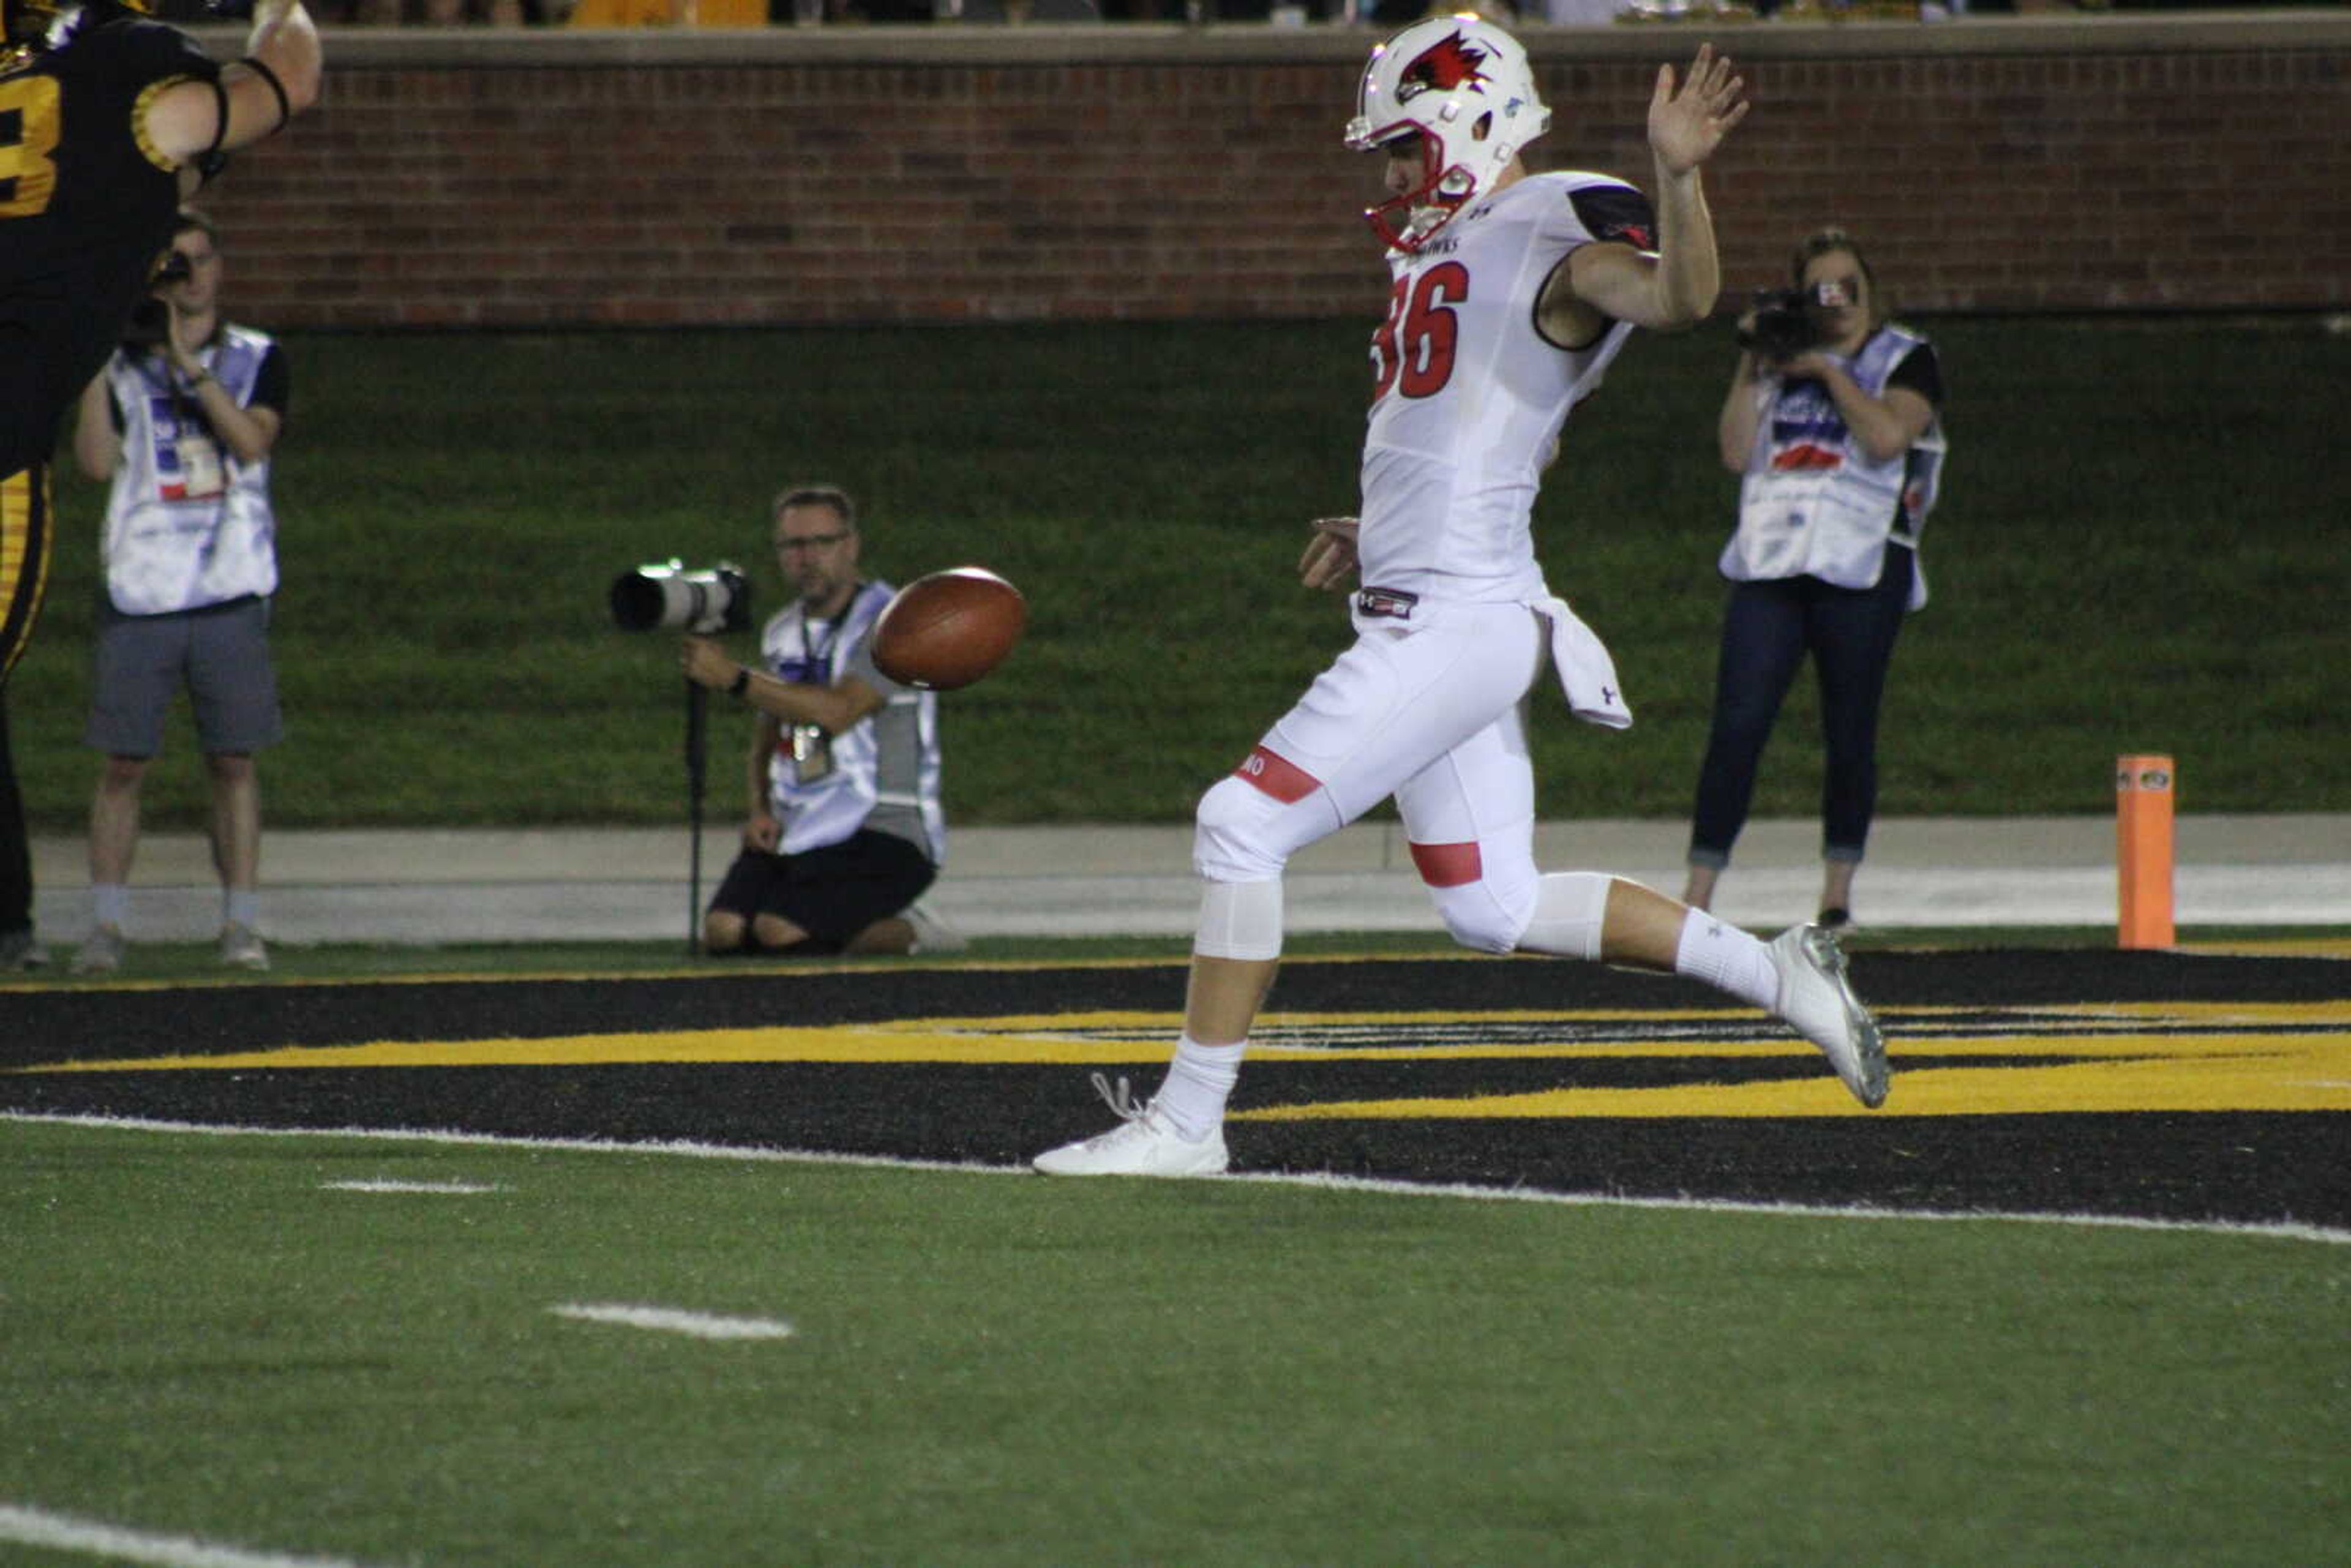 Senior punter Jake Reynolds drops the ball to punt during a 50-0 loss to The University of Missouri on Saturday, Sept. 14.